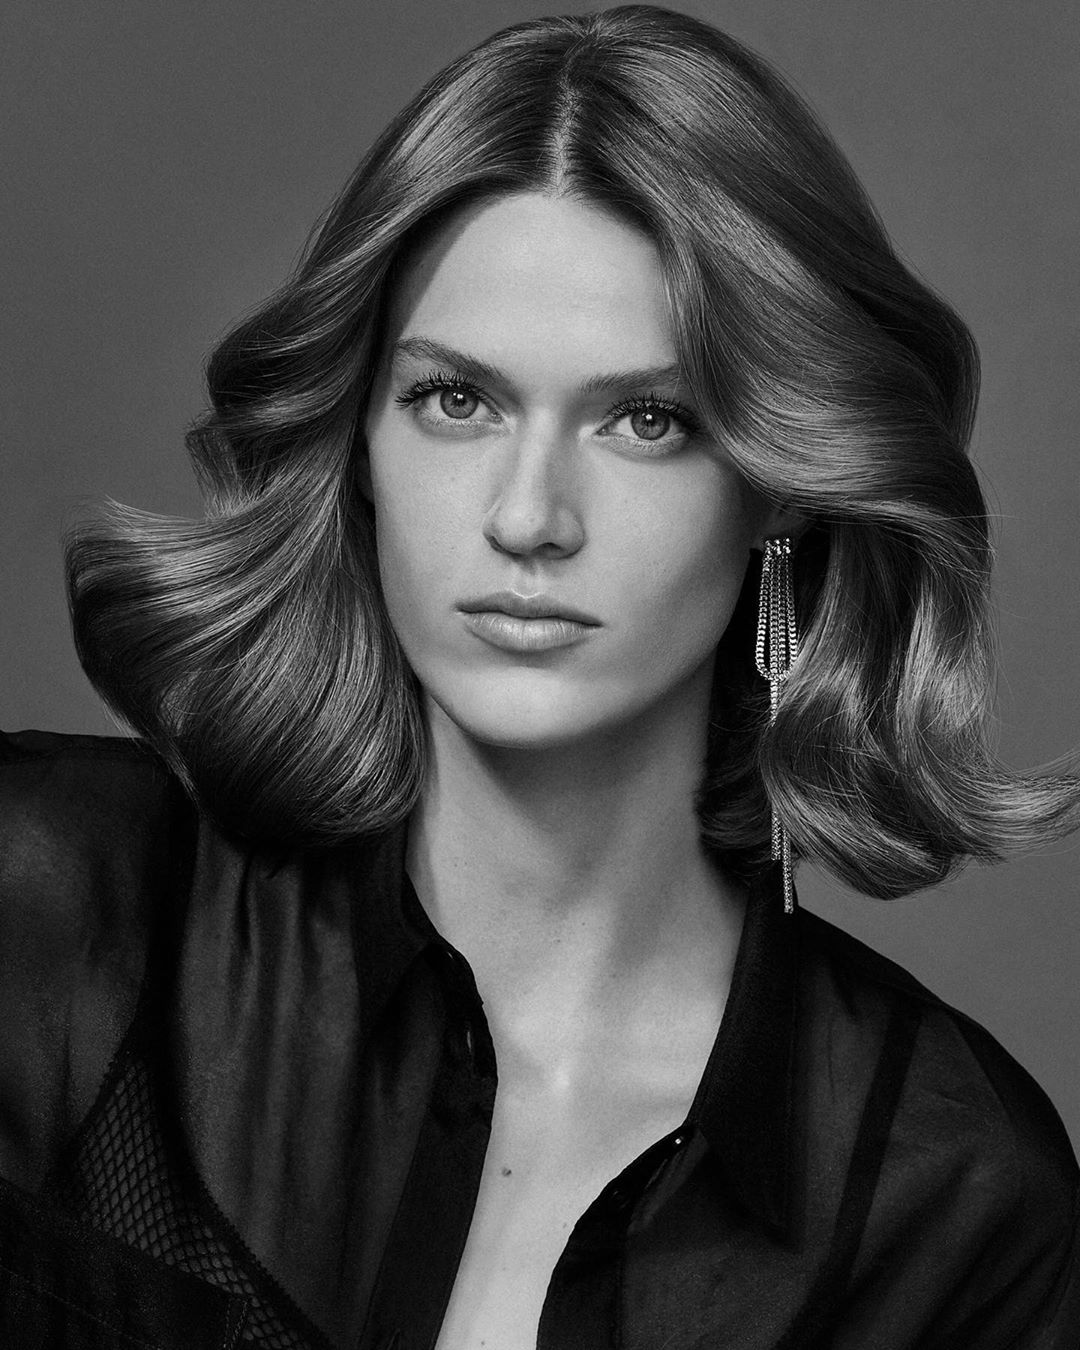 Schwarzkopf International - These voluminous waves, loosely inspired by Heather Locklear’s 80s' do, echo the ‘more is more’ attitude that defined the hairstyles of the 80s'. #schwarzkopf1898 
by @armi...